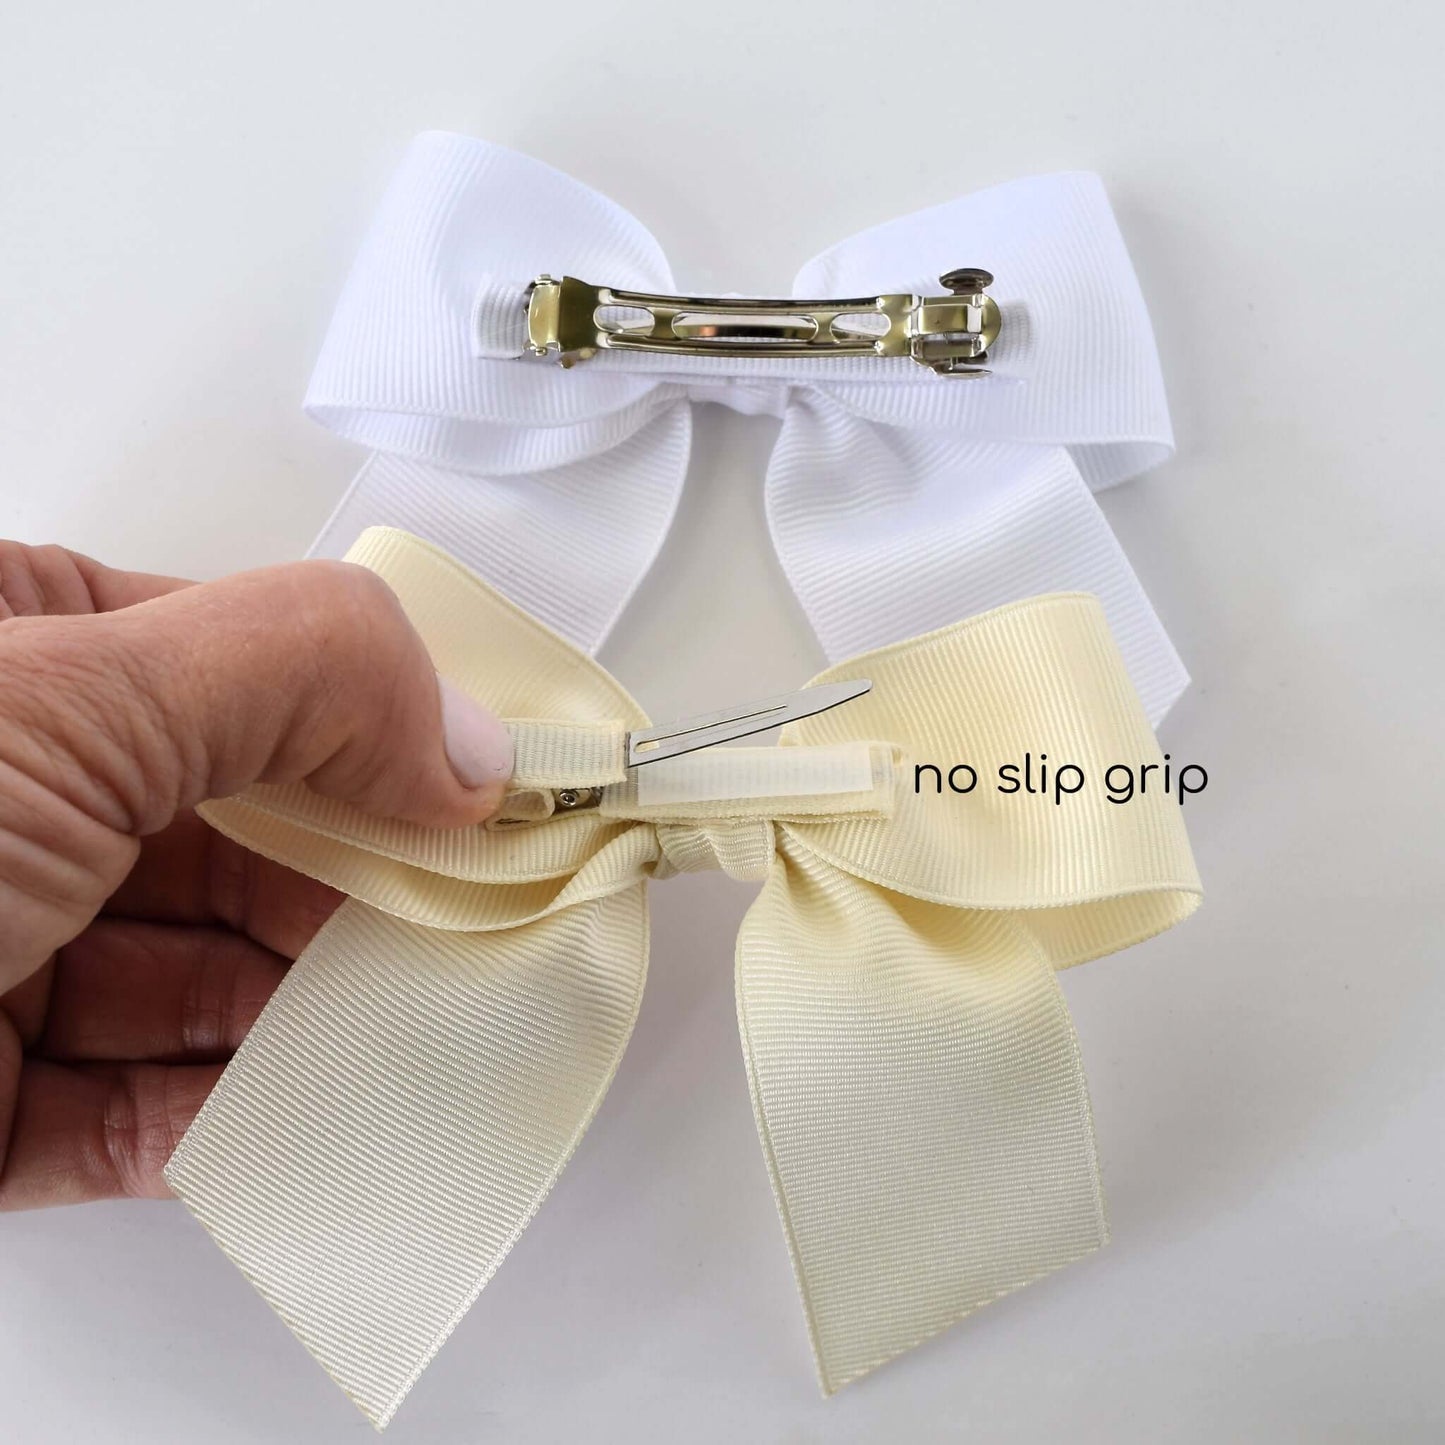 Handmade neutral grosgrain sailor bows with alligator clips and no-slip grip, in ivory and white, perfect for toddlers and girls